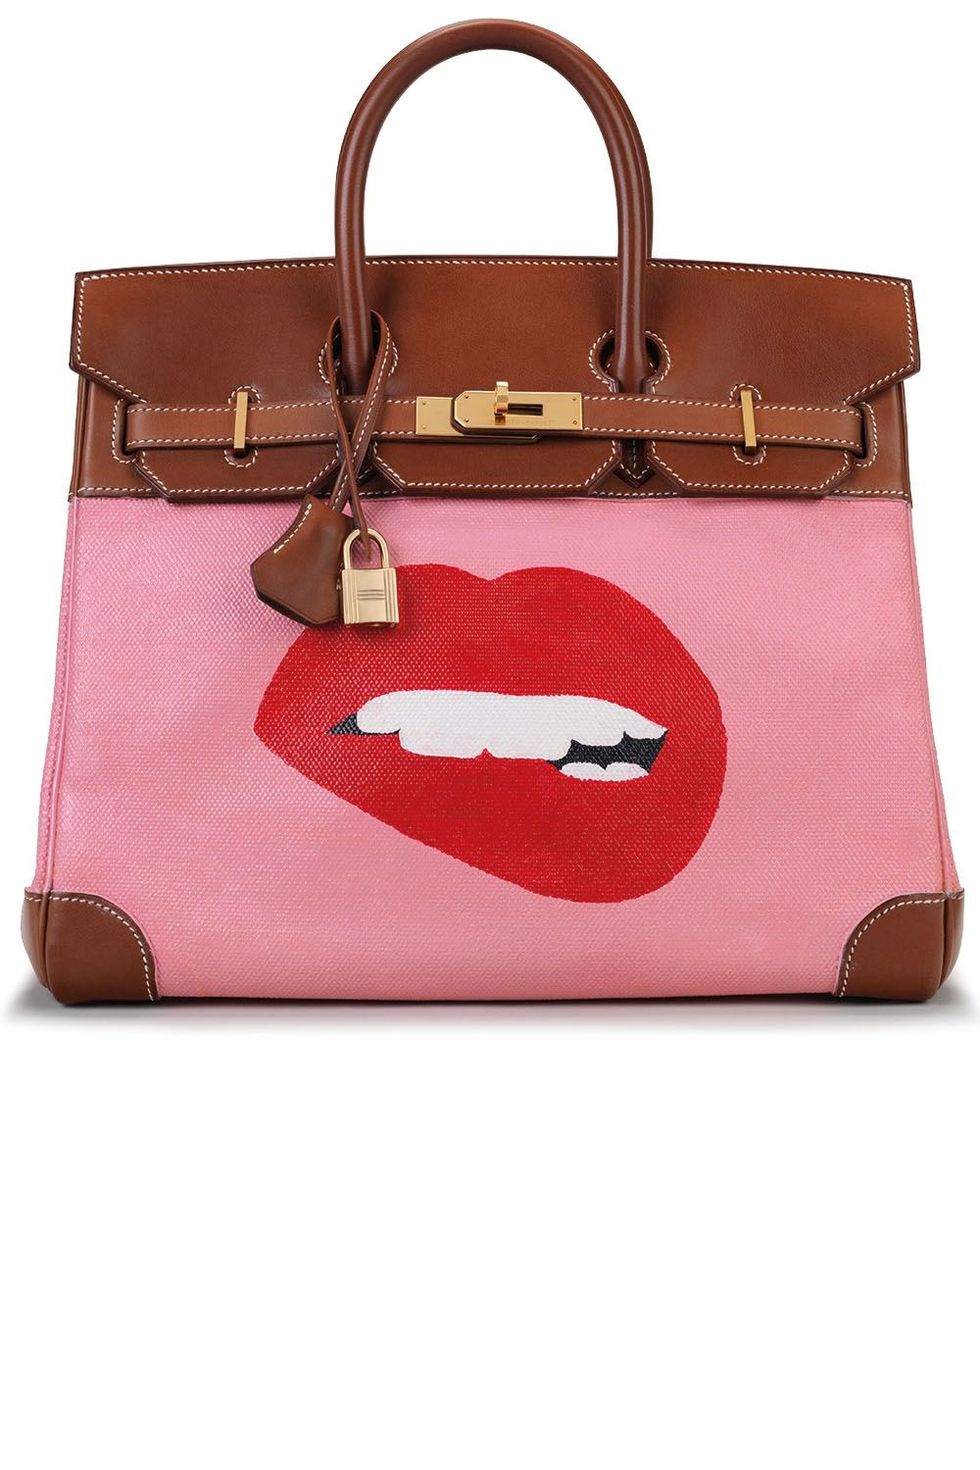 Handbag, Bag, Pink, Fashion accessory, Product, Beauty, Brown, Shoulder bag, Leather, Material property, 